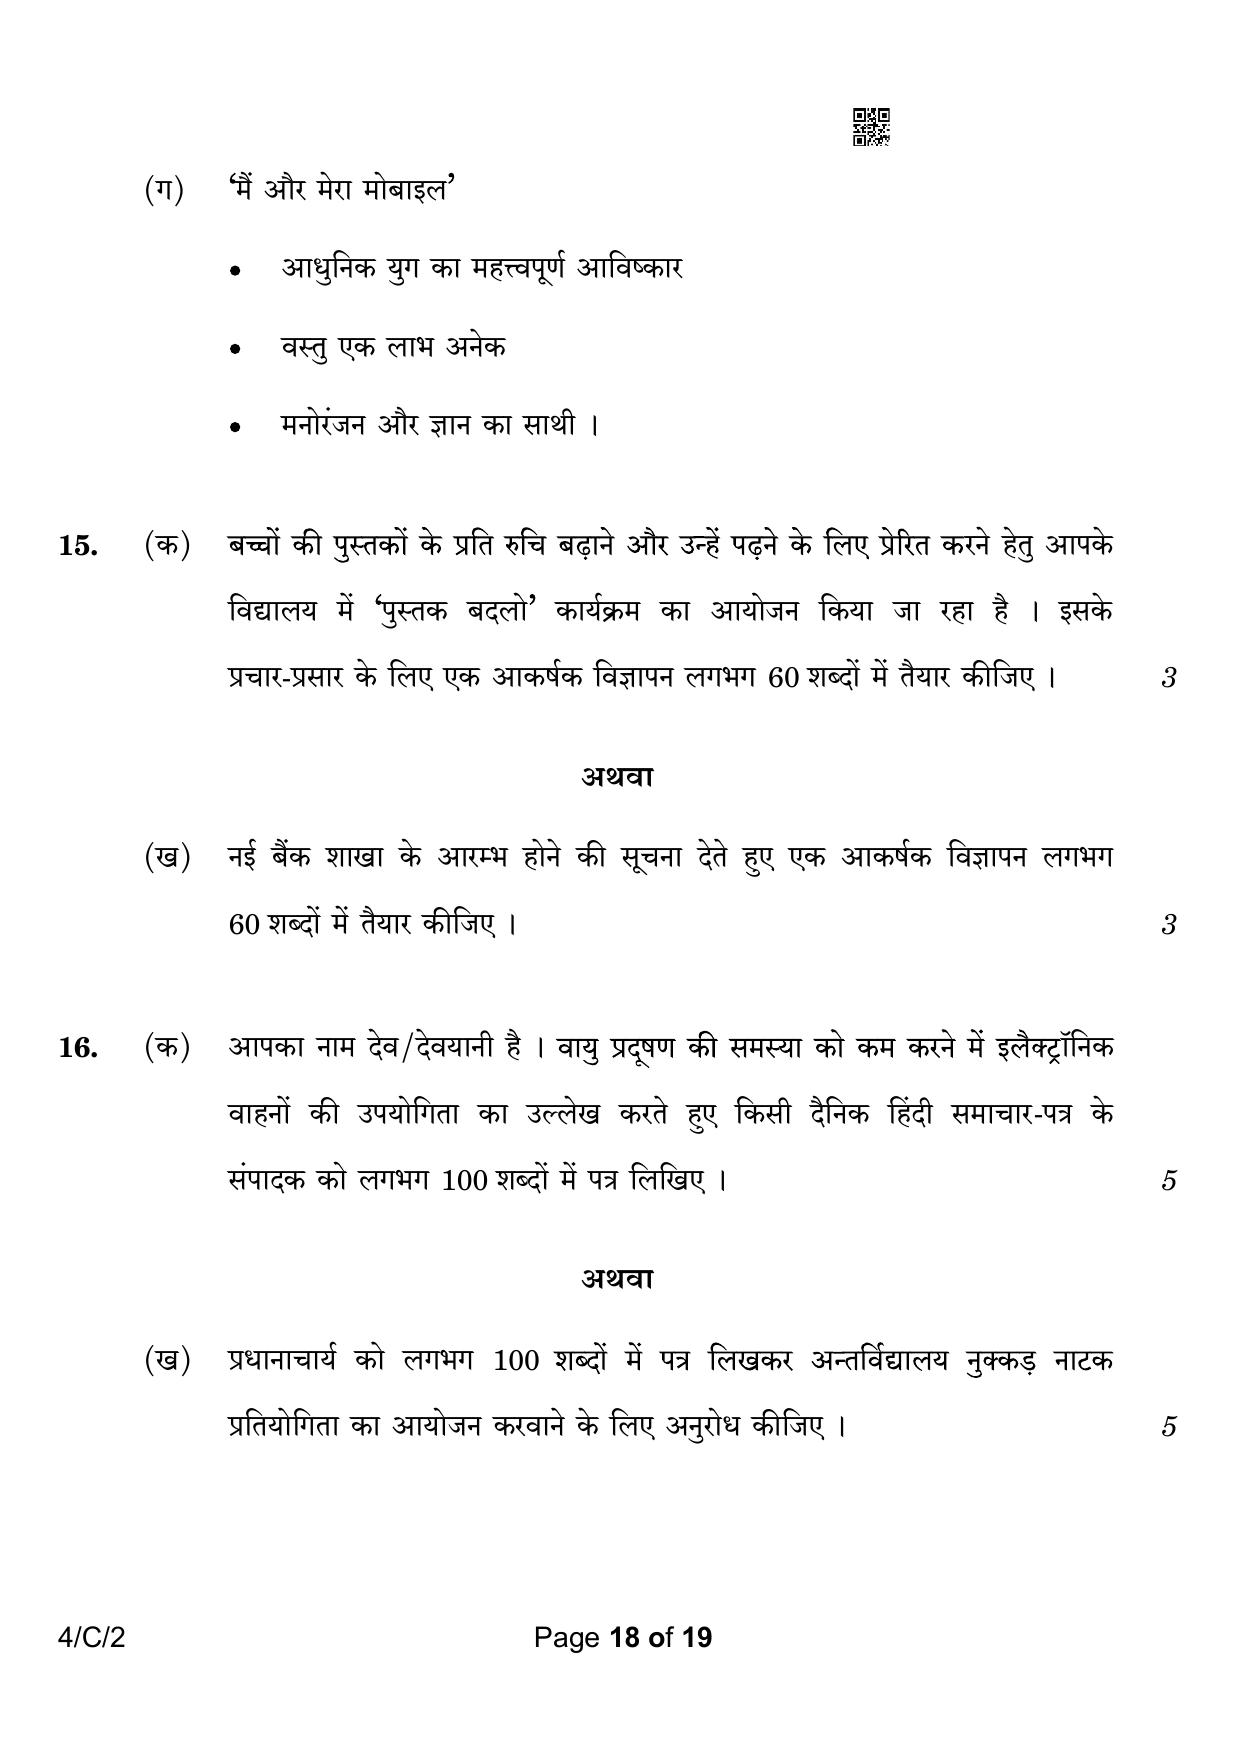 CBSE Class 10 4-2 Hindi B 2023 (Compartment) Question Paper - Page 18